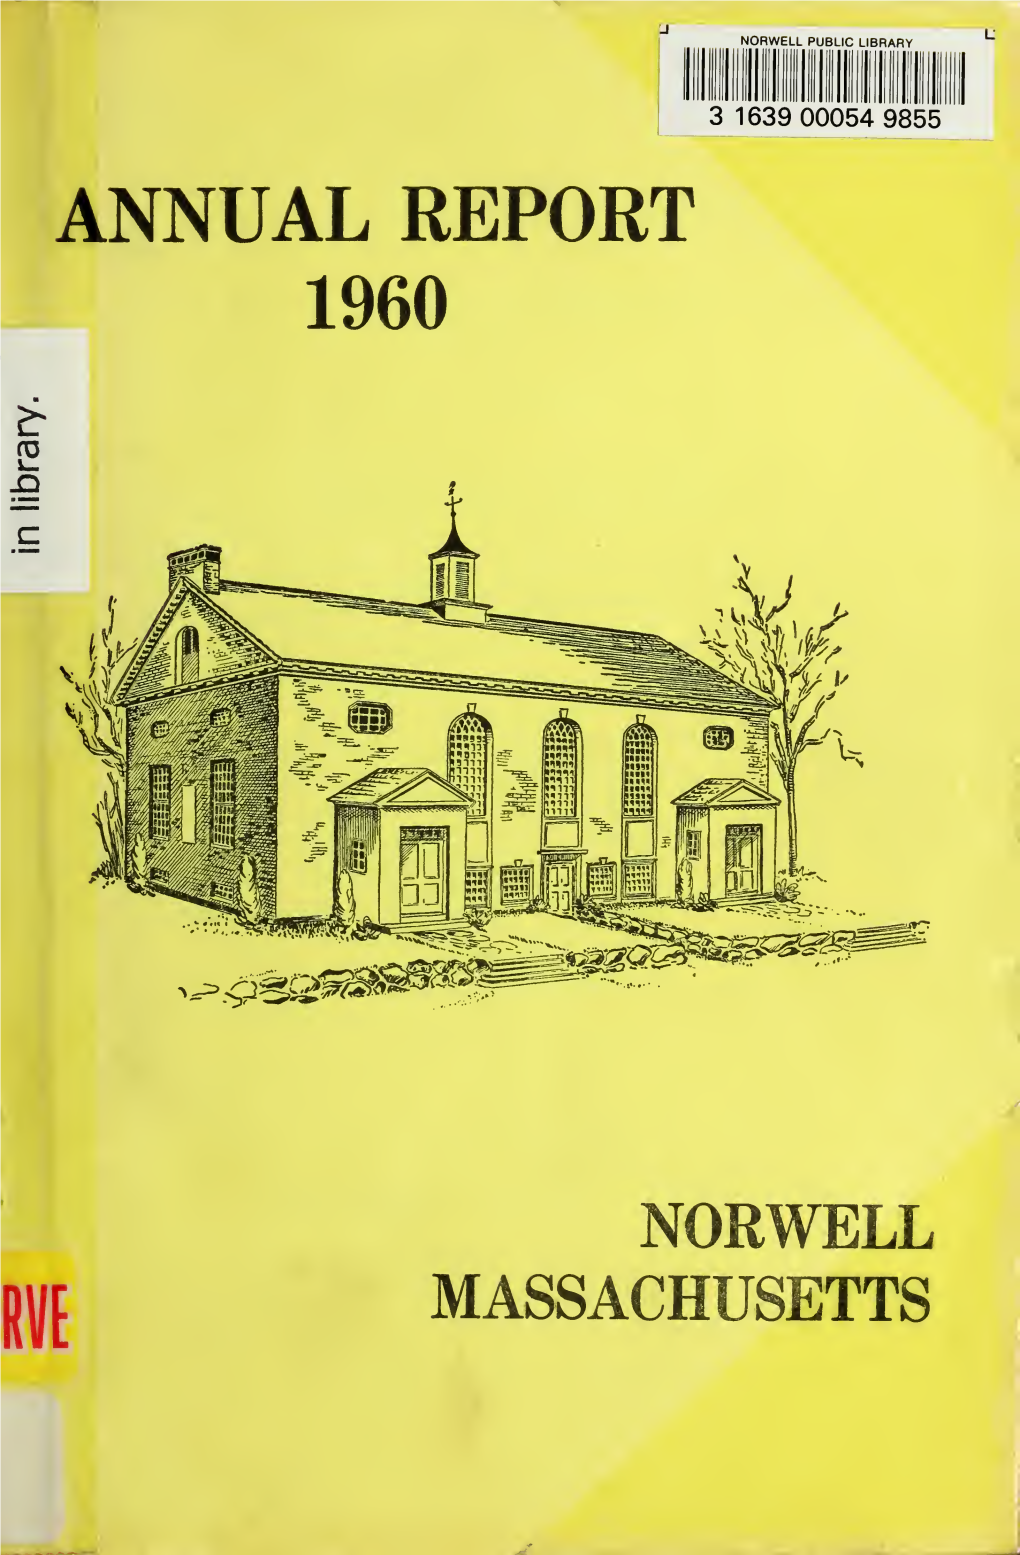 Town of Norwell Annual Report